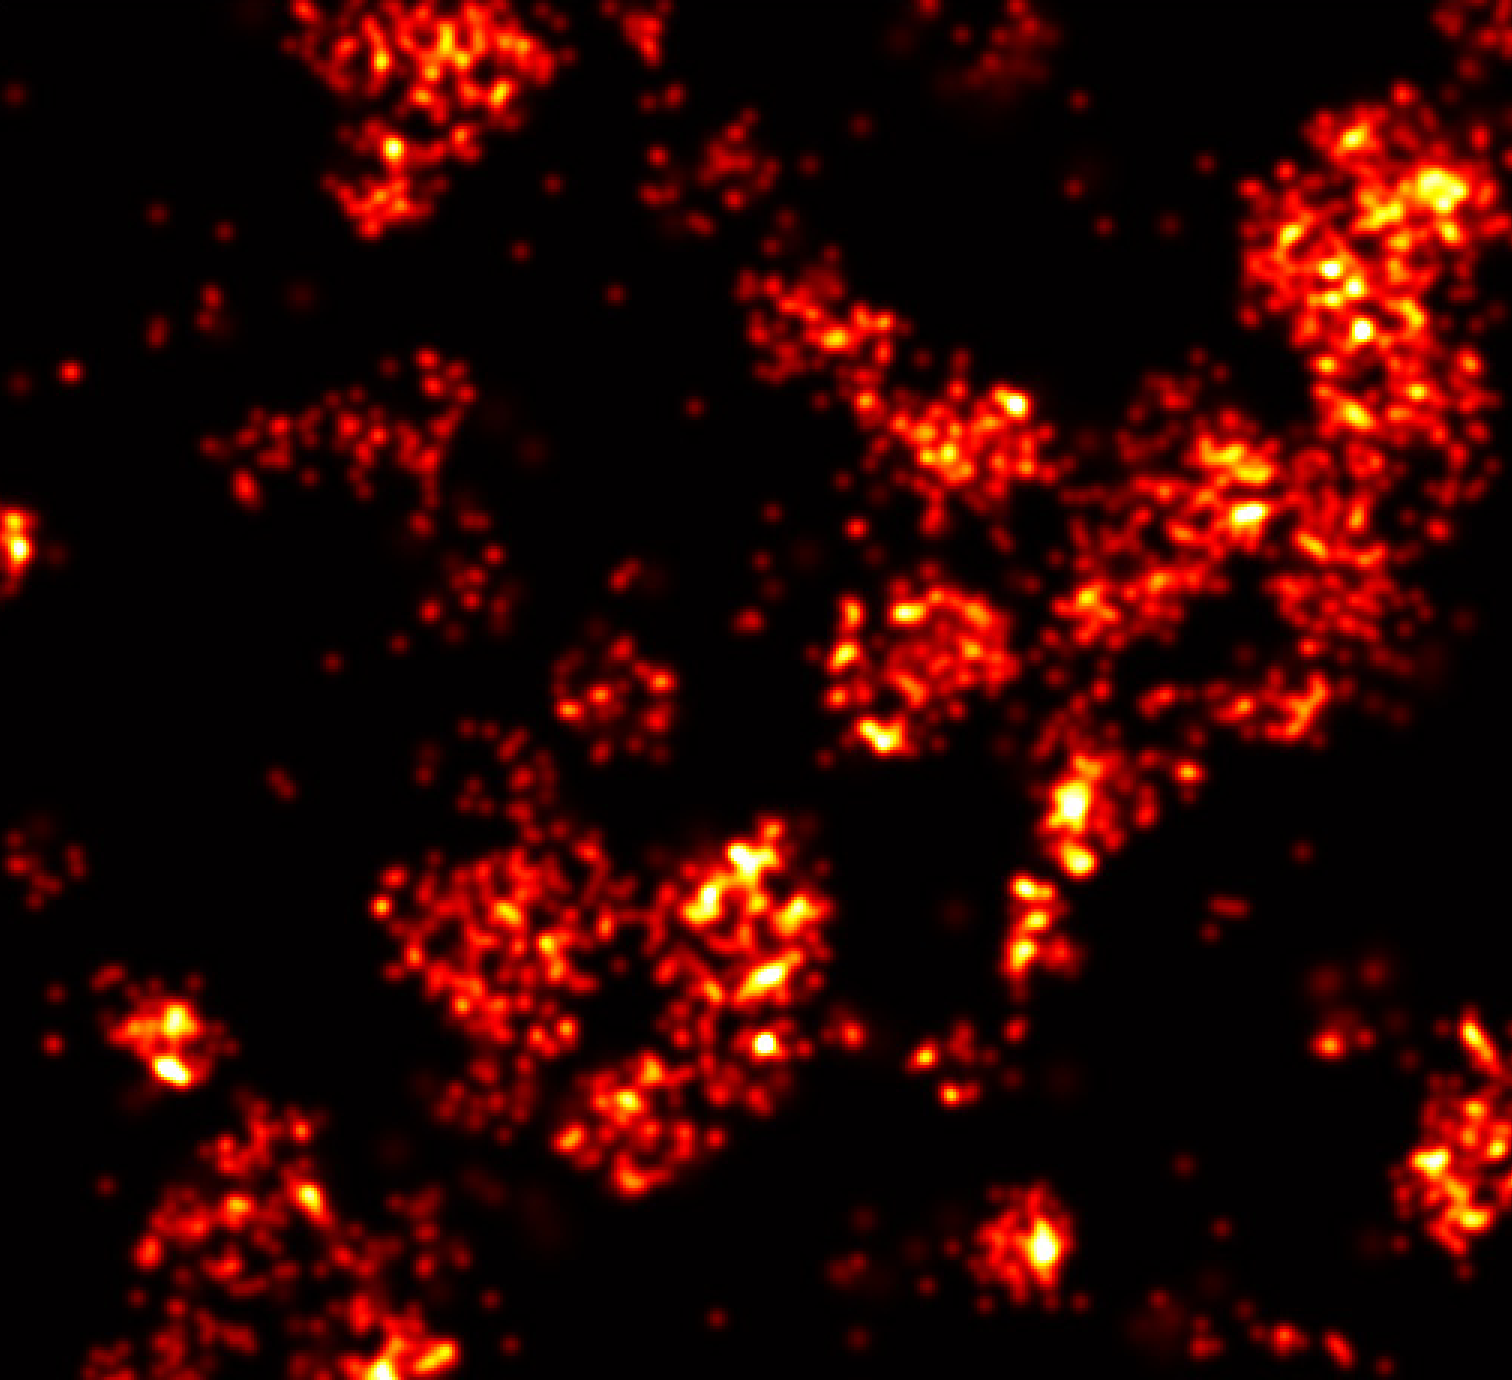 Lots of red dots in cell-like pattern on black background